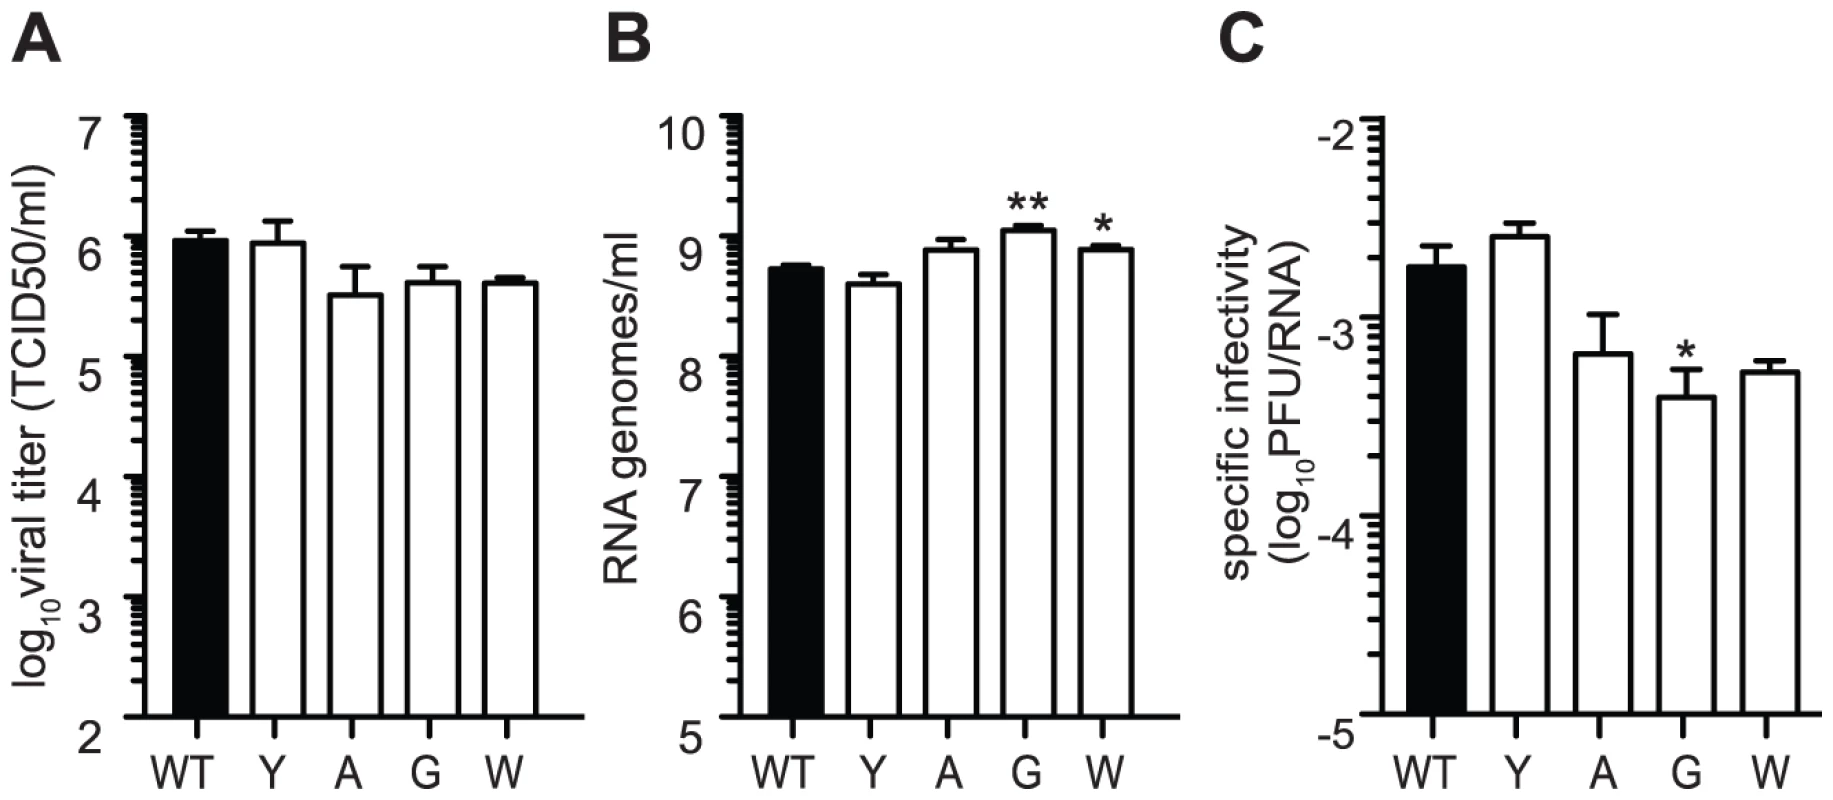 Mutators produce more RNA genomes and have lower specific infectivity than wildtype.